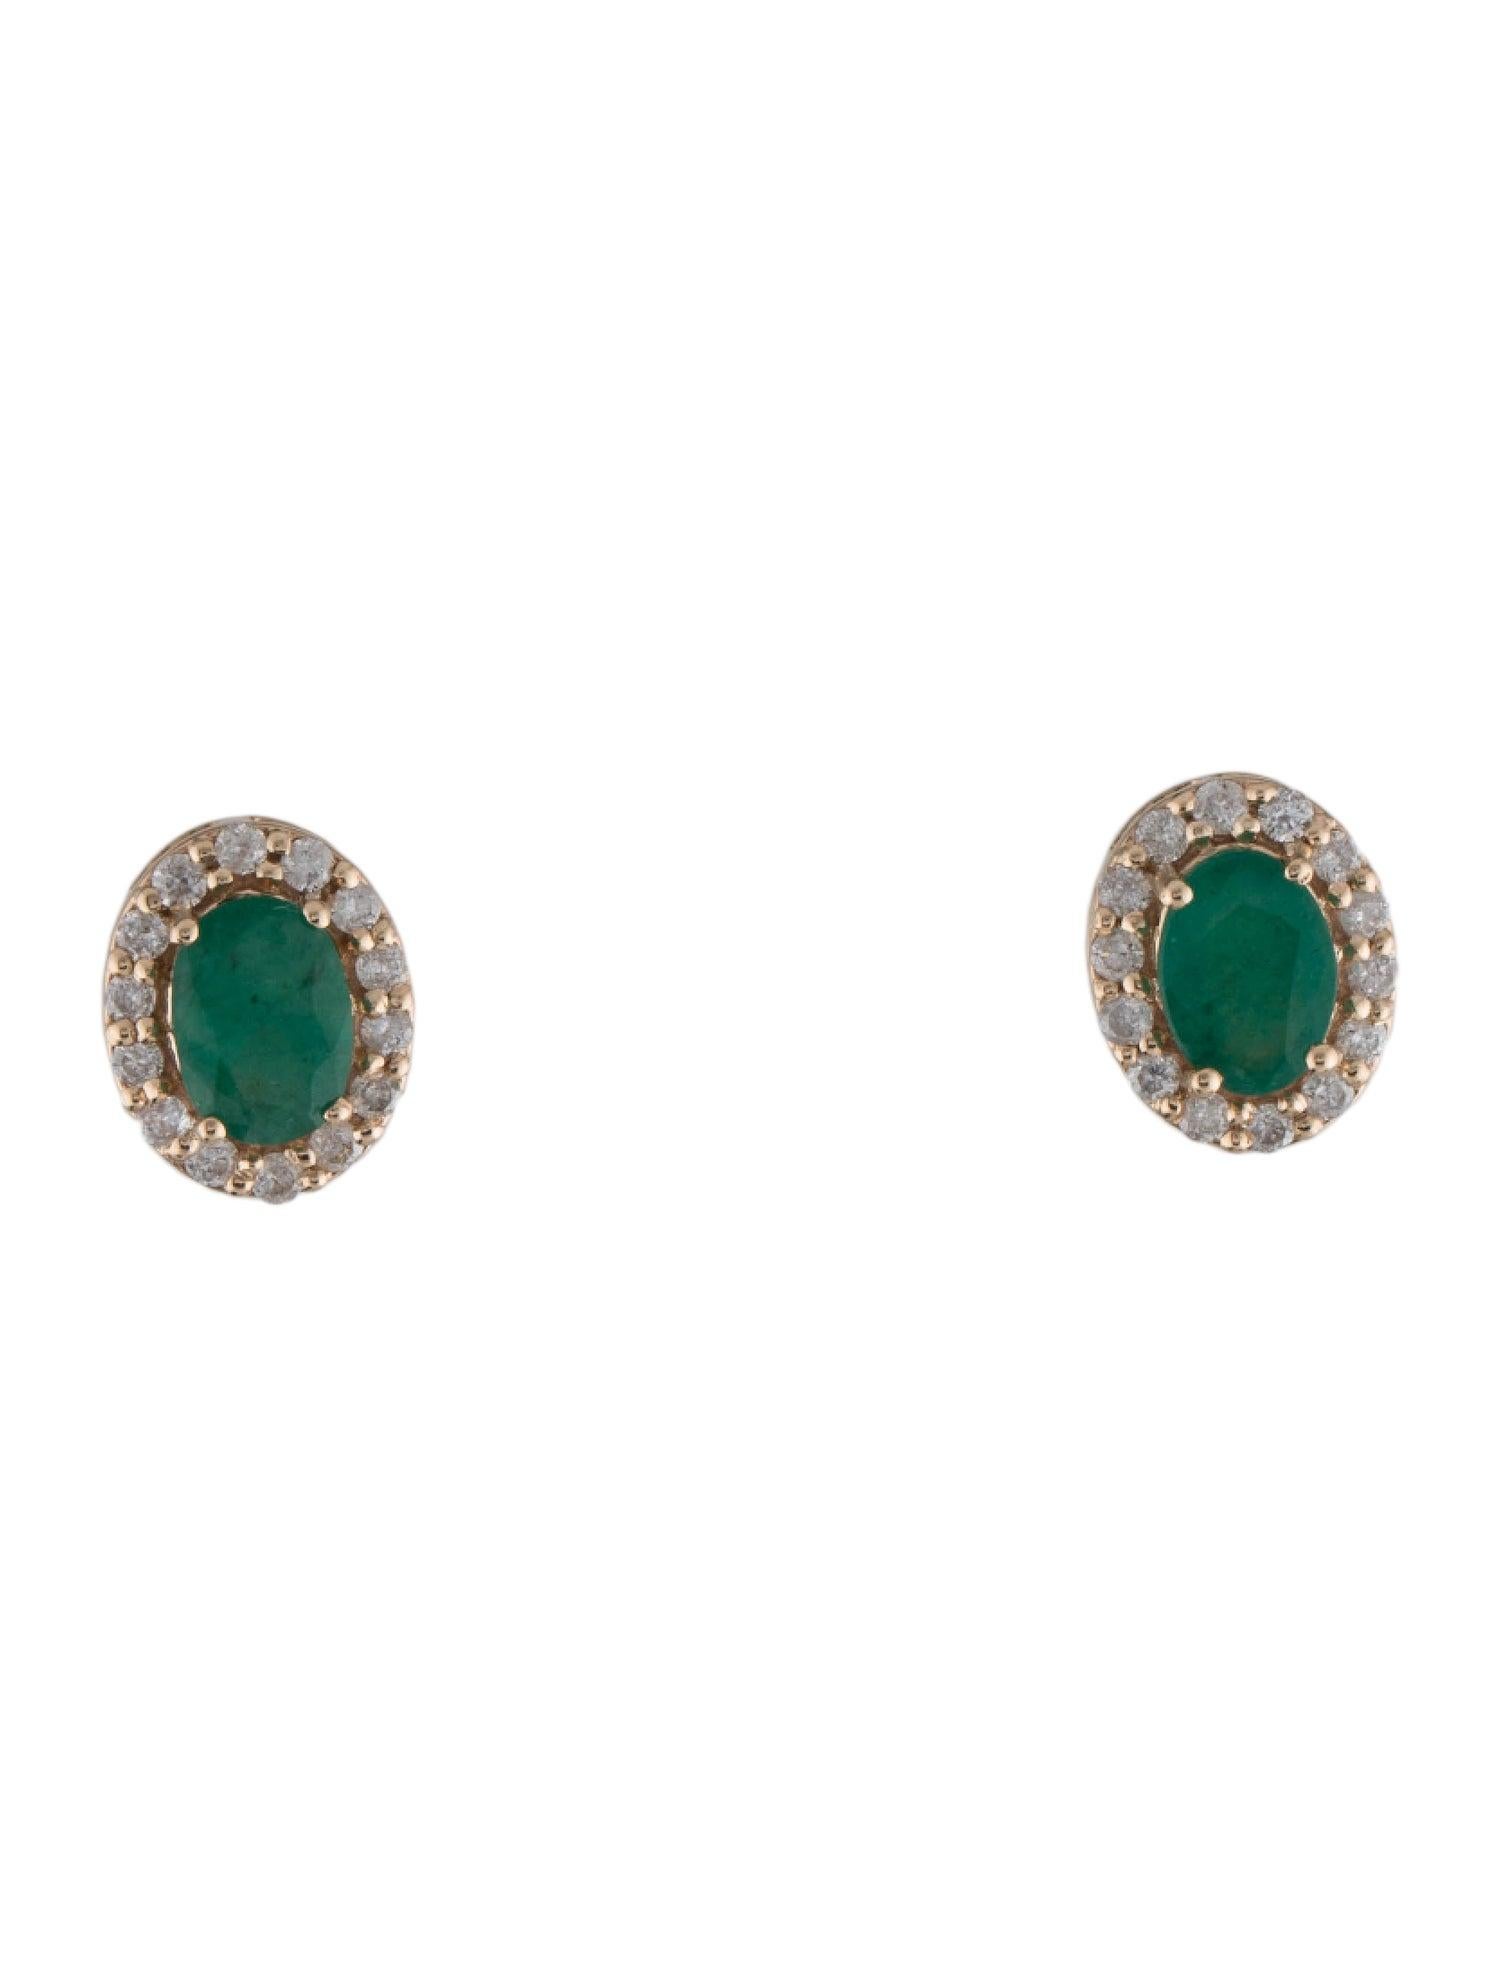 Immerse yourself in the captivating allure of nature with our Forest Ferns Emerald Earrings from Jeweltique's distinguished collection. These earrings are more than just jewelry; they are a testament to the mesmerizing beauty found in the heart of